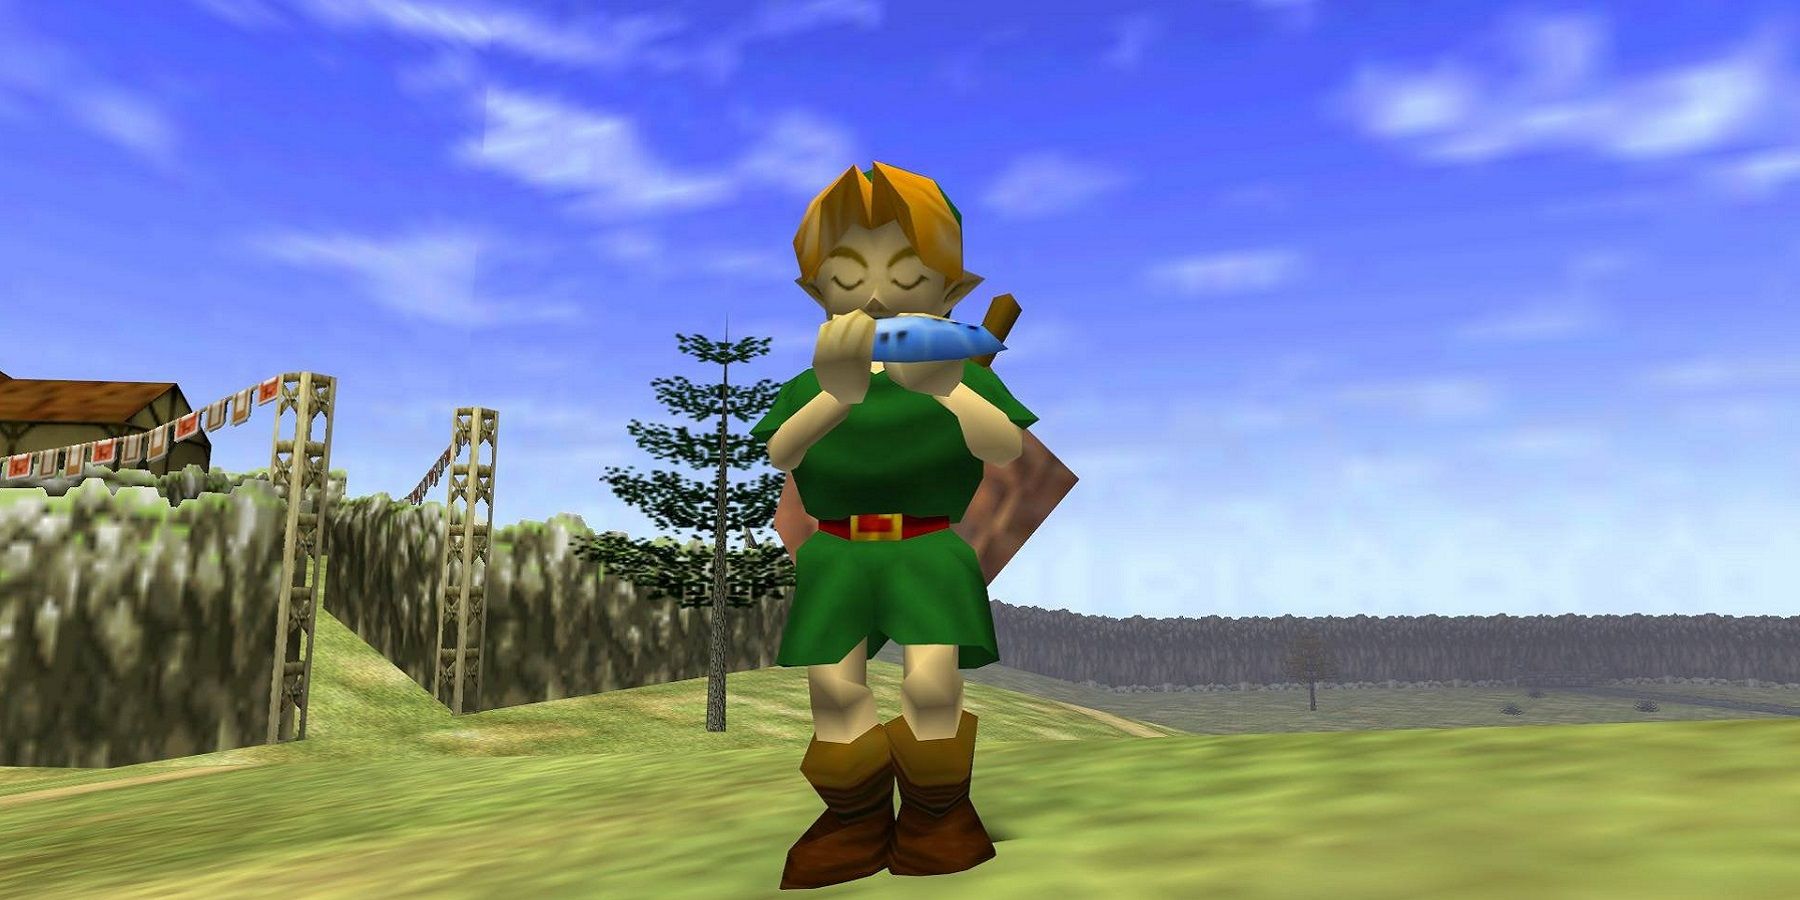 Image from The Legend of Zelda: Ocarina of Time showing Link playing the titular ocarina in a field.